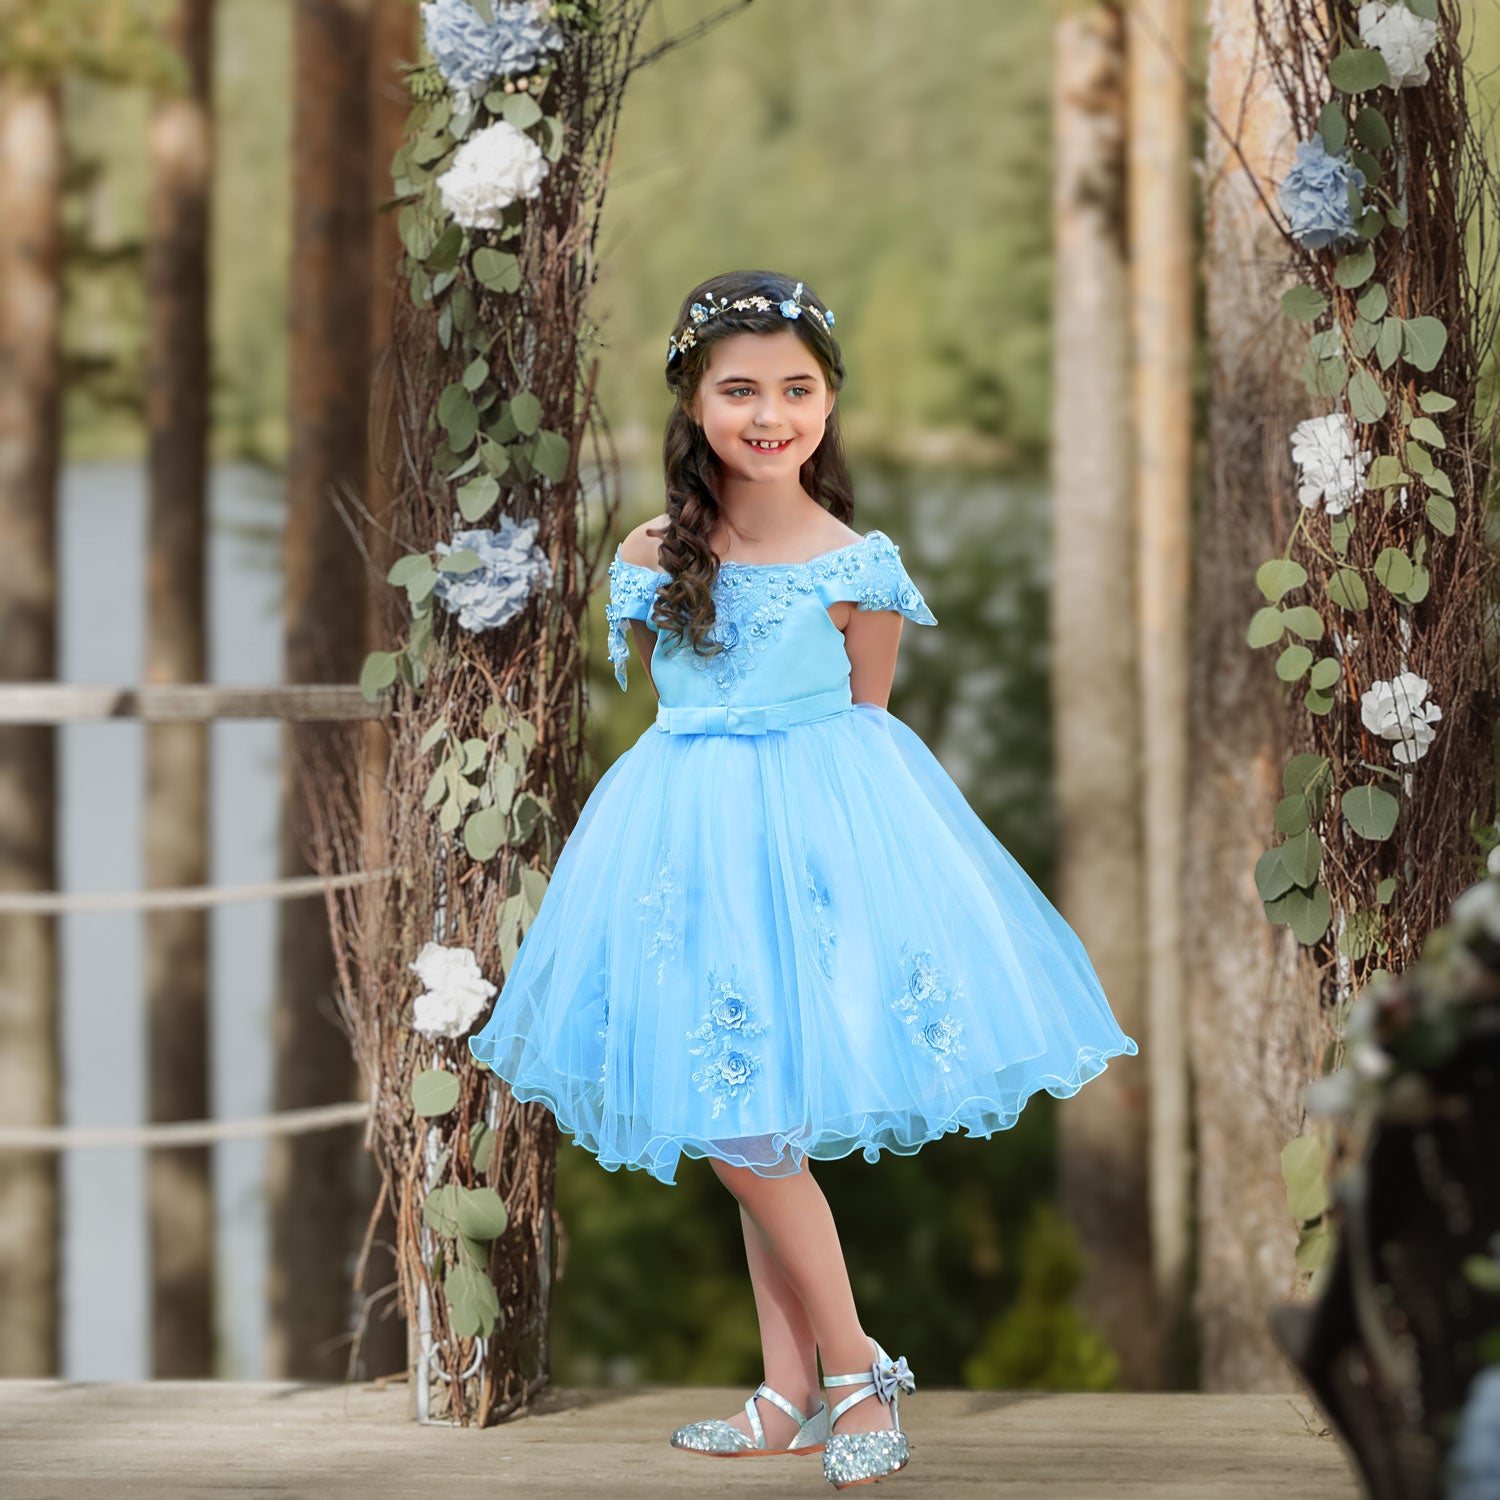 Blue Girls' Dresses & Special Occasion Outfits | Dillard's